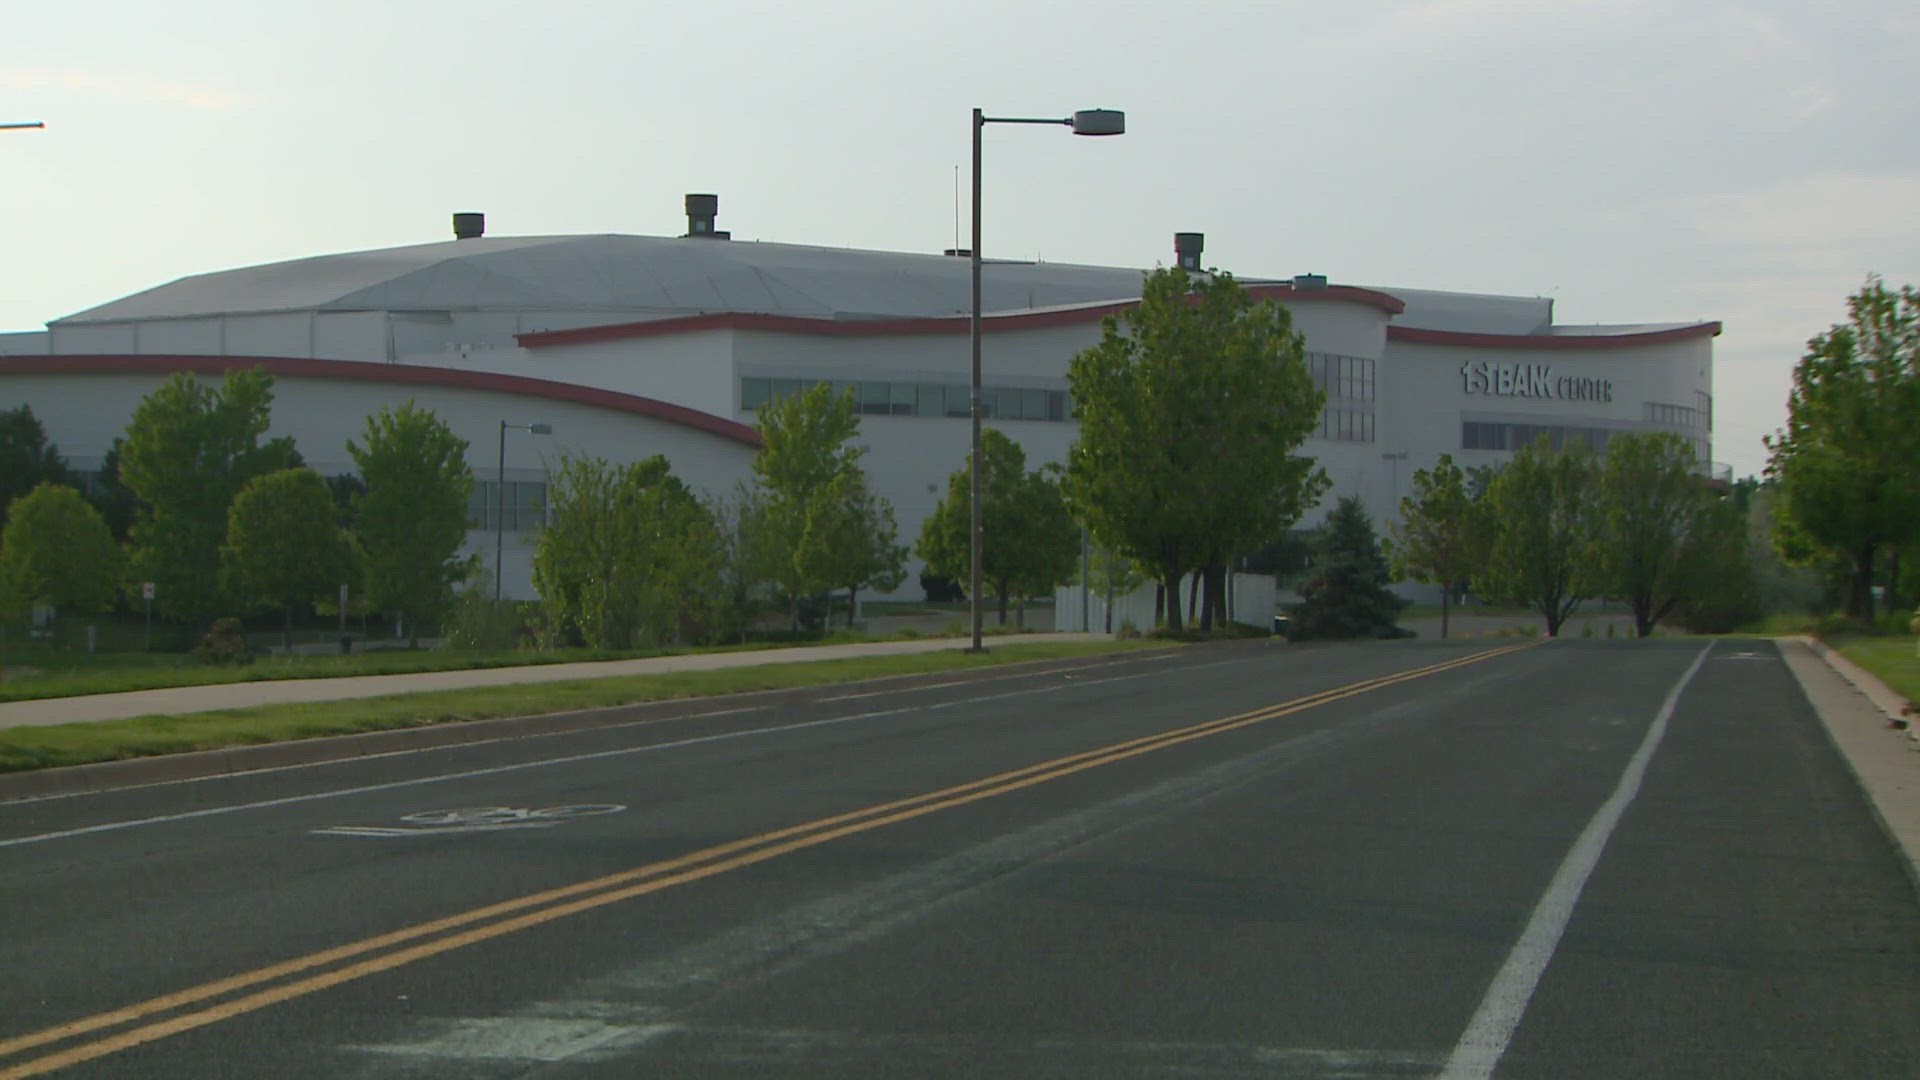 The arena will be demolished by 2024 after Broomfield officials voted to terminate operations at the facility.